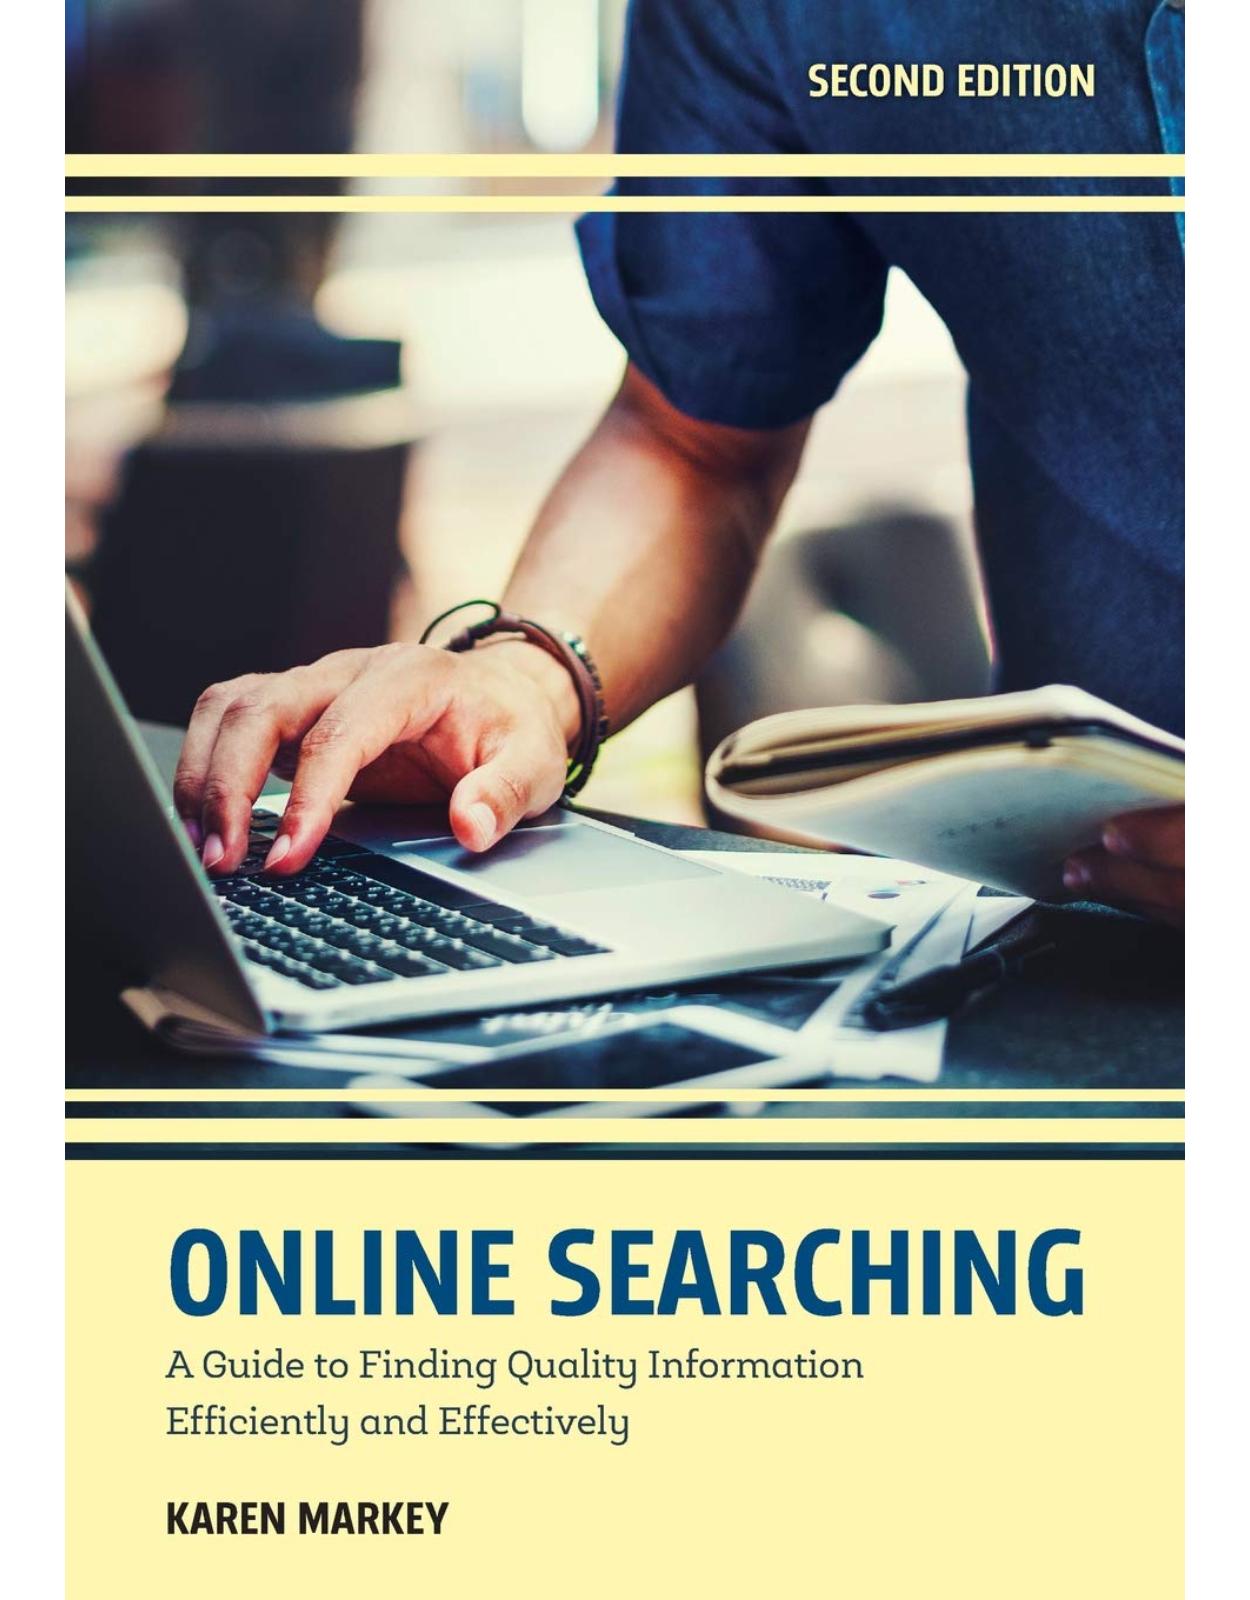 Online Searching. A Guide to Finding Quality Information Efficiently and Effectively, Second Edition